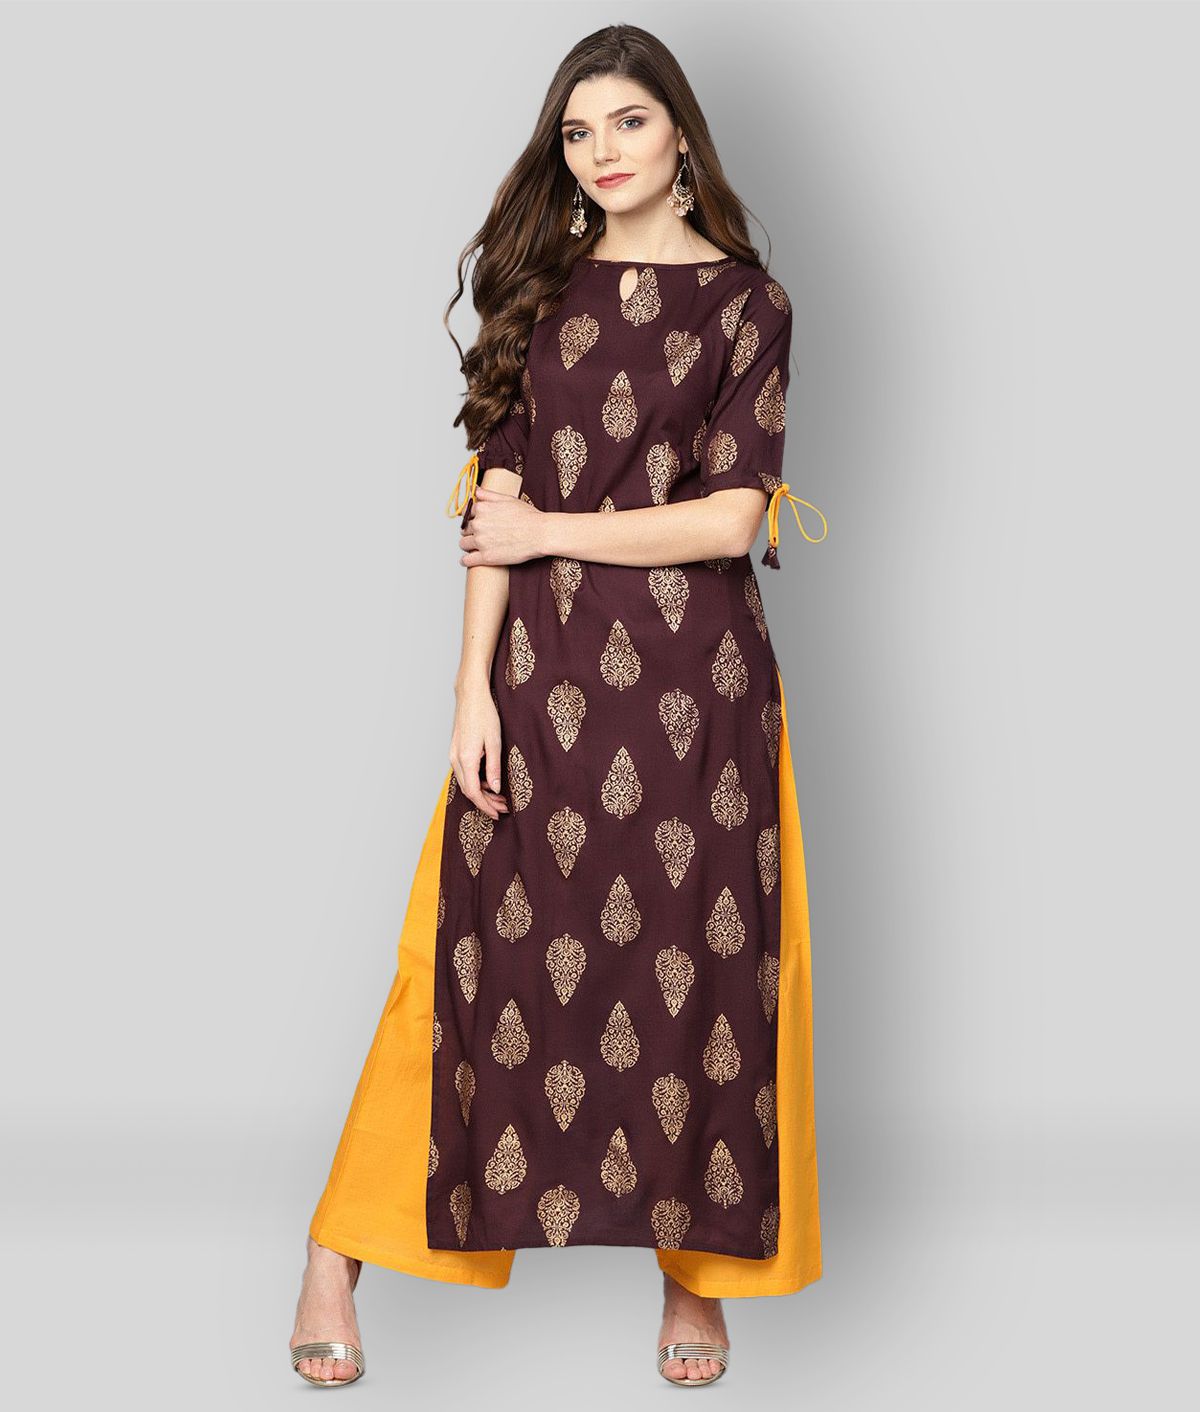     			Frionkandy - Brown Straight Cotton Women's Stitched Salwar Suit ( Pack of 1 )